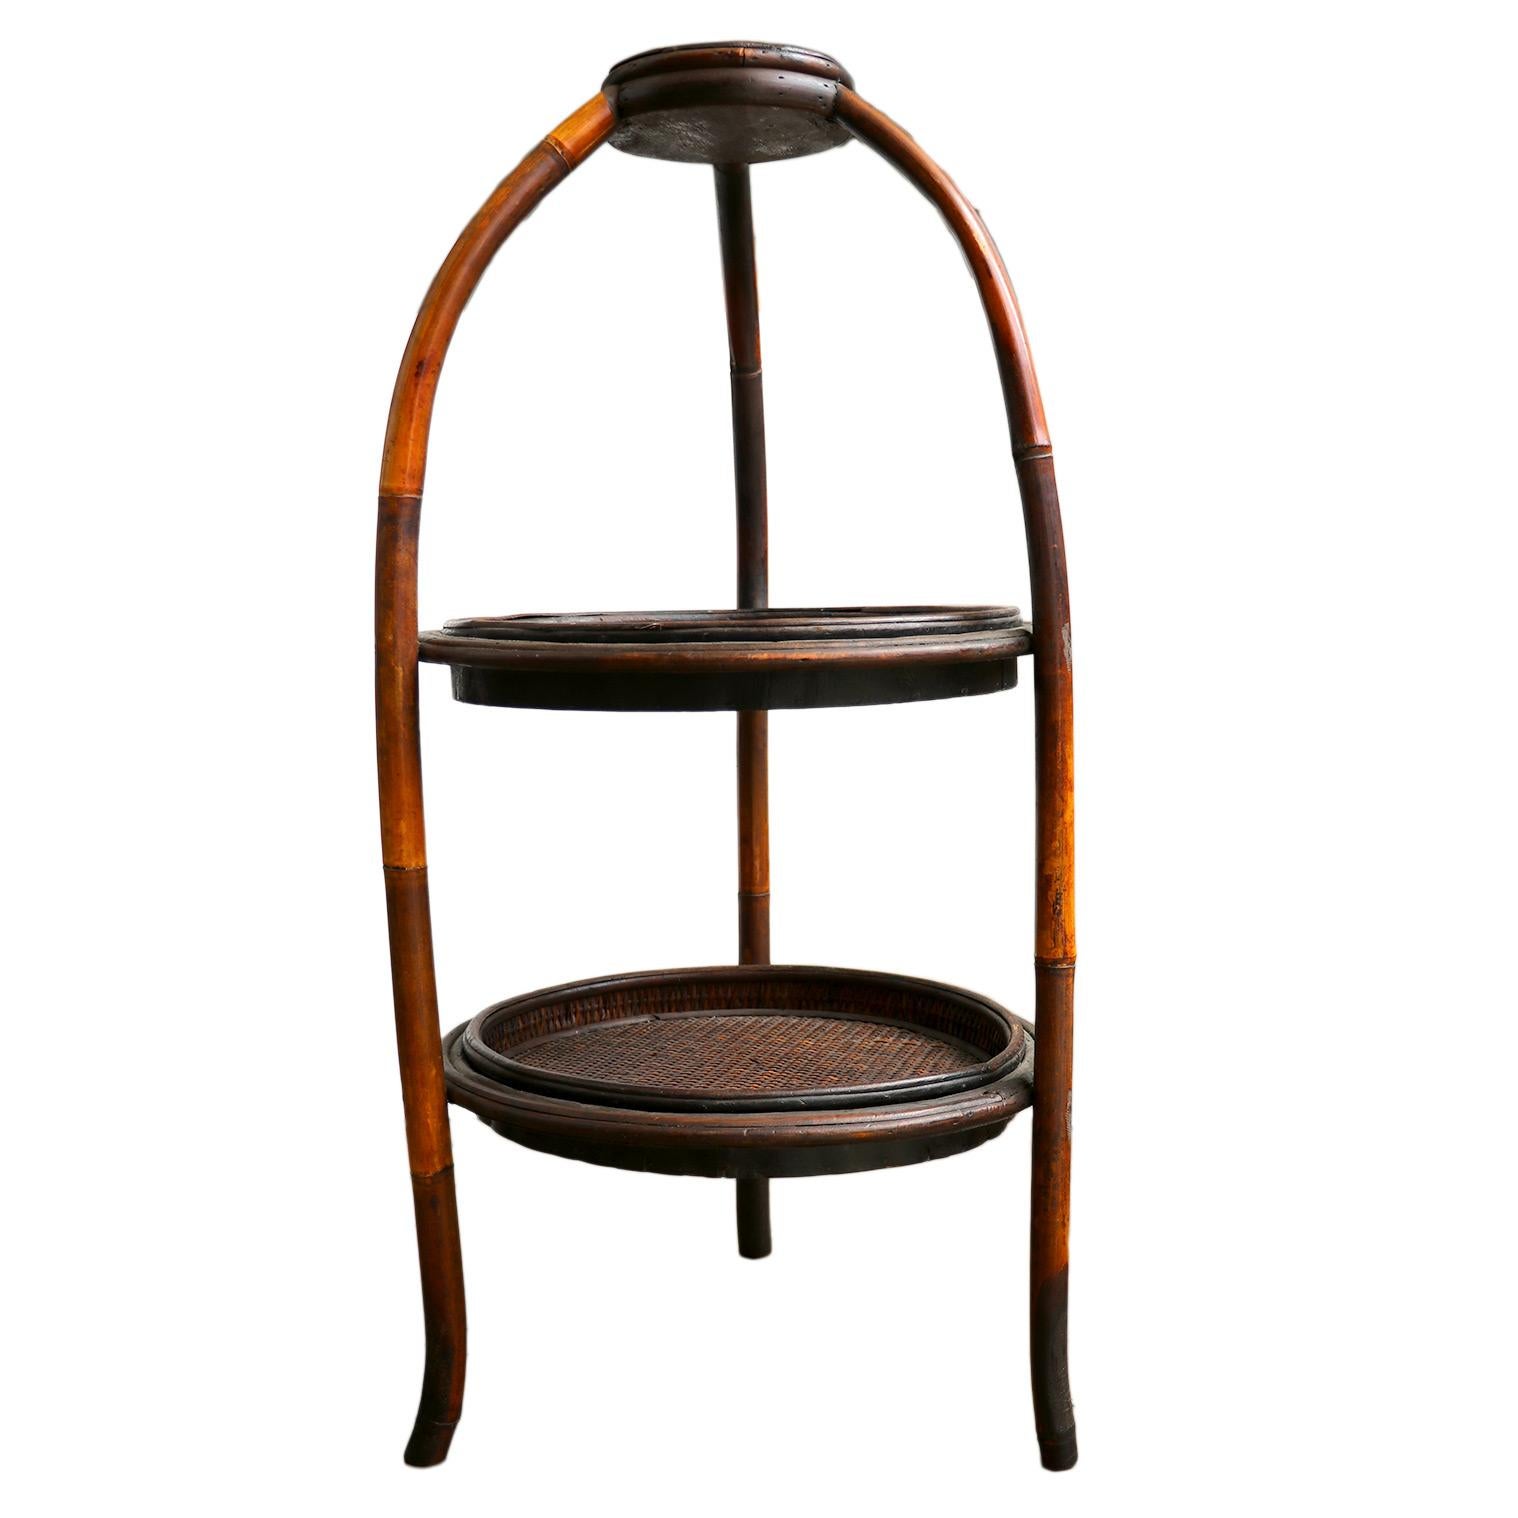 This charming vintage end table features two circular tiers, providing ample space to showcase your favorite decor pieces or simply store everyday essentials. The top tray offers a clearance of 11.5 inches, while the bottom tray offers 8.5 inches,